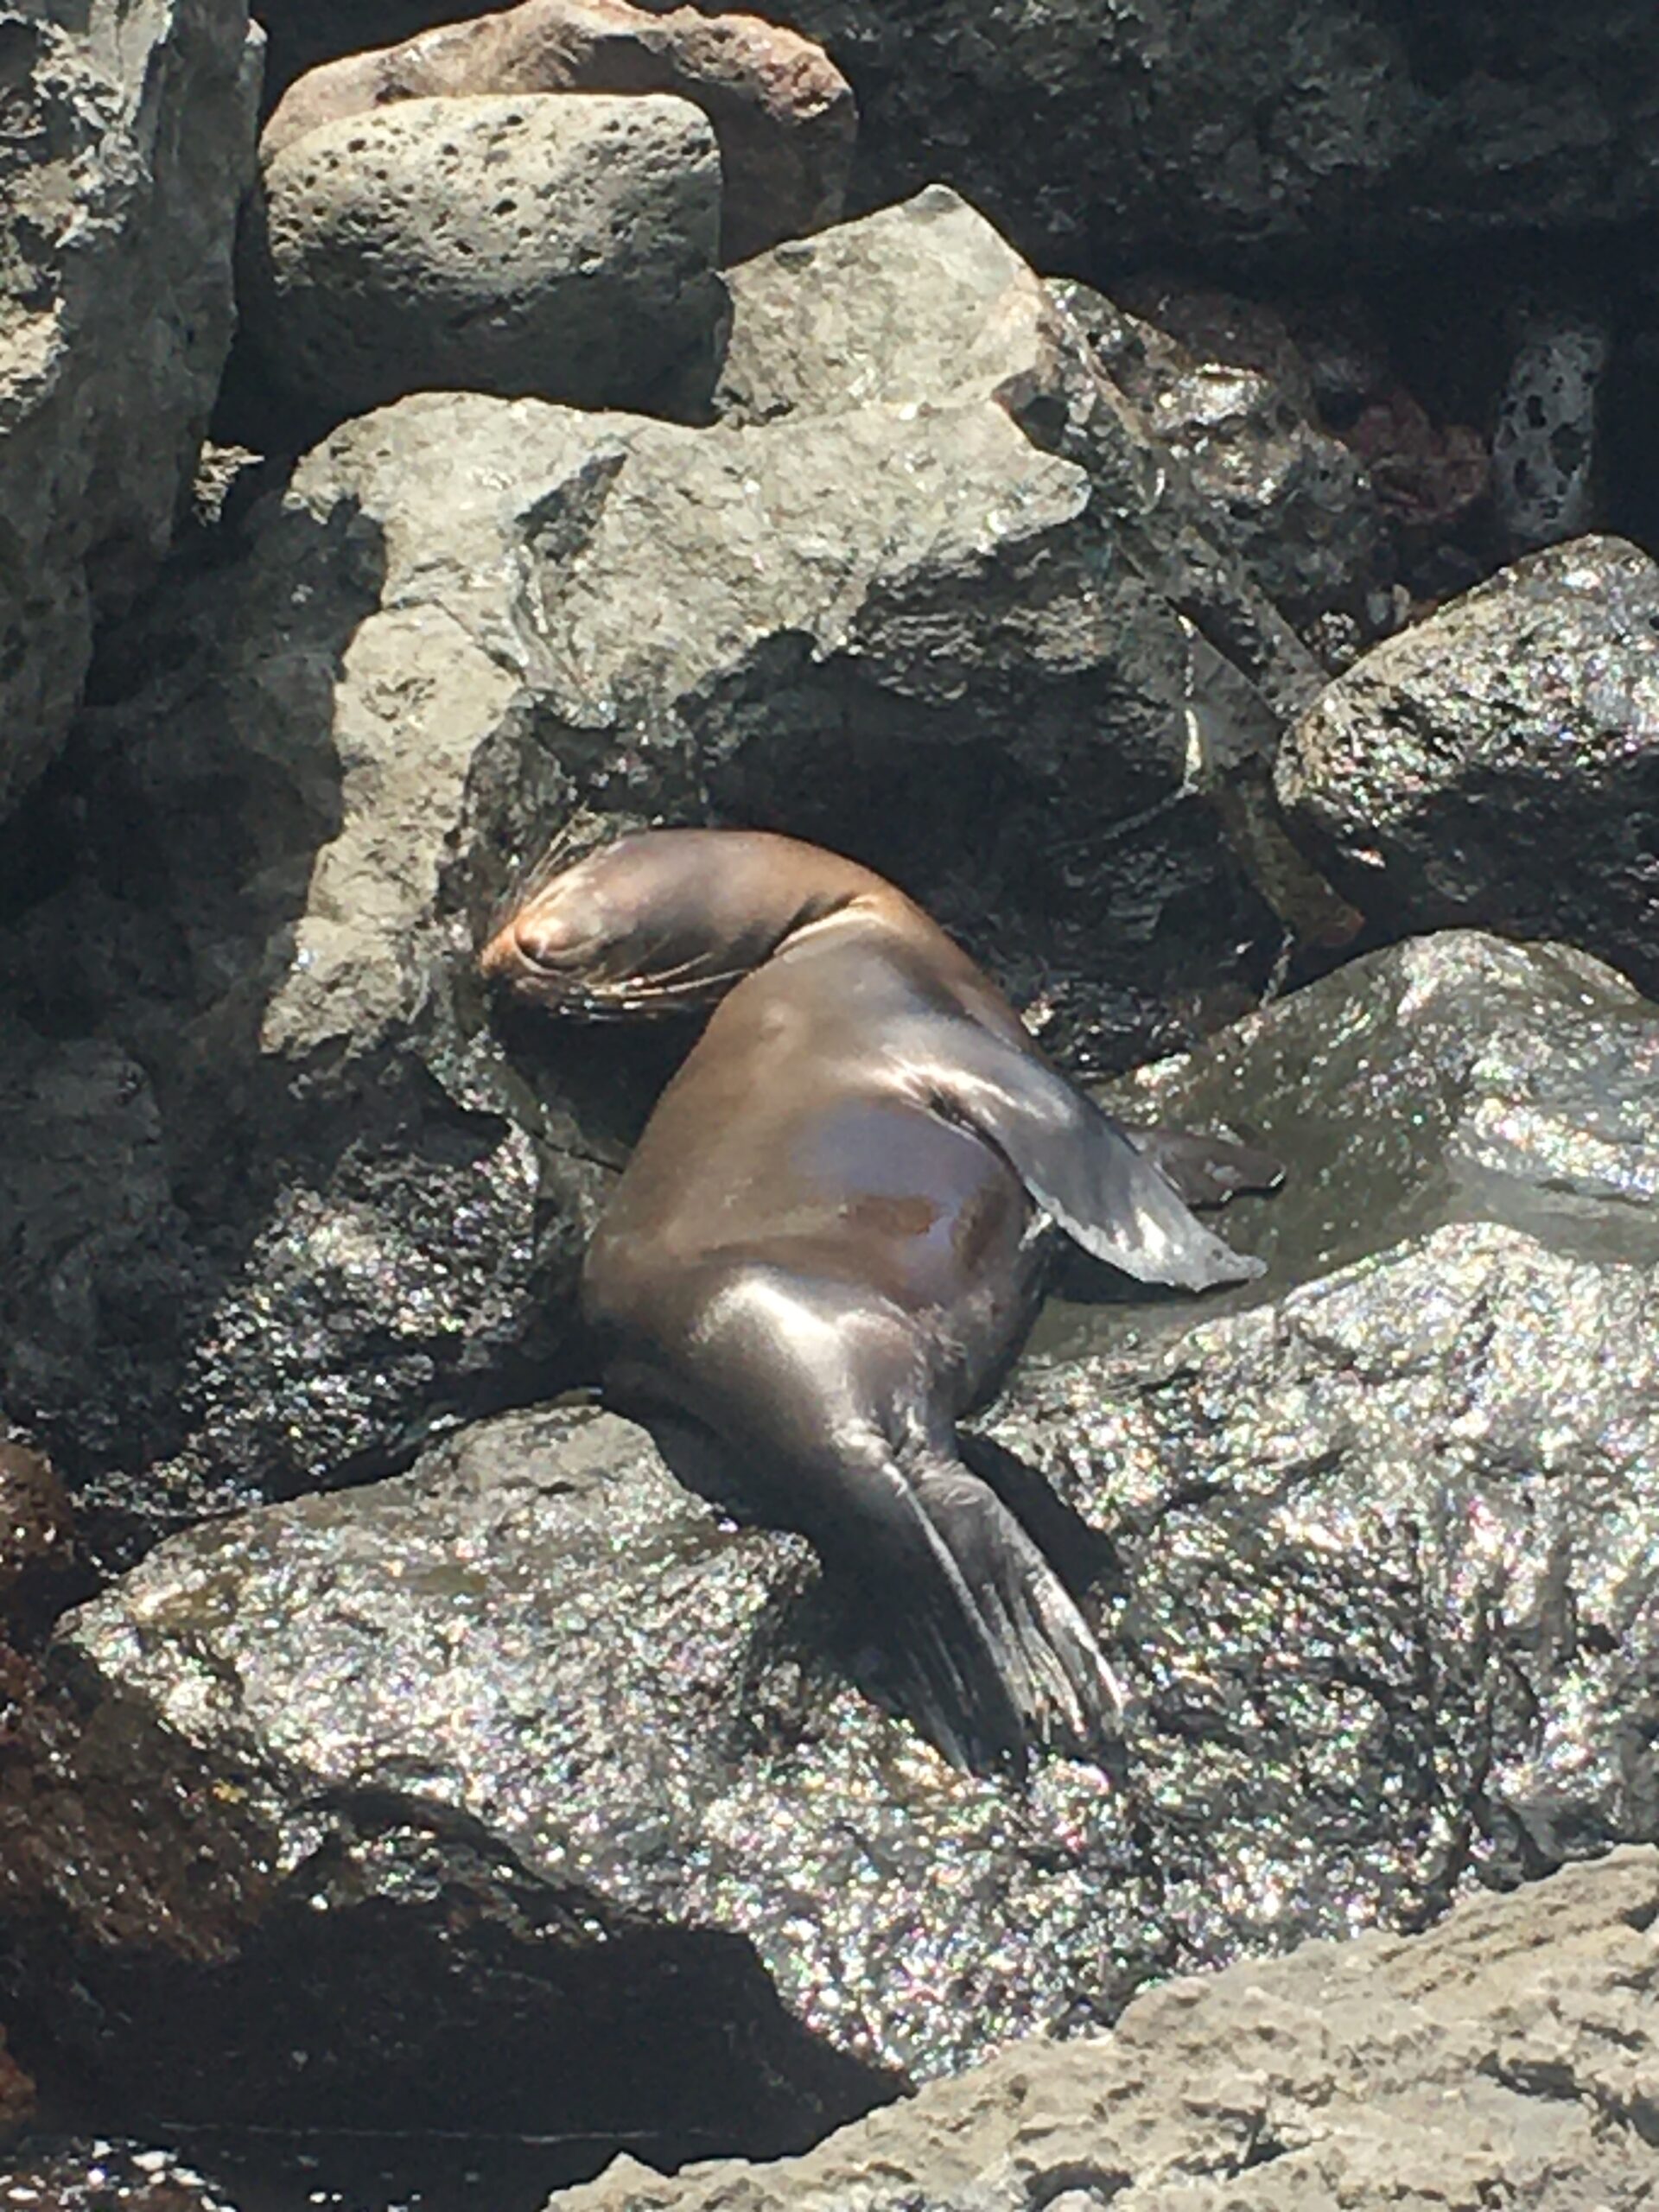 Pictured is a sea lion sitting on a grouping of rocks. In the phot, the sea lion has its neck completely extended back towards its back.